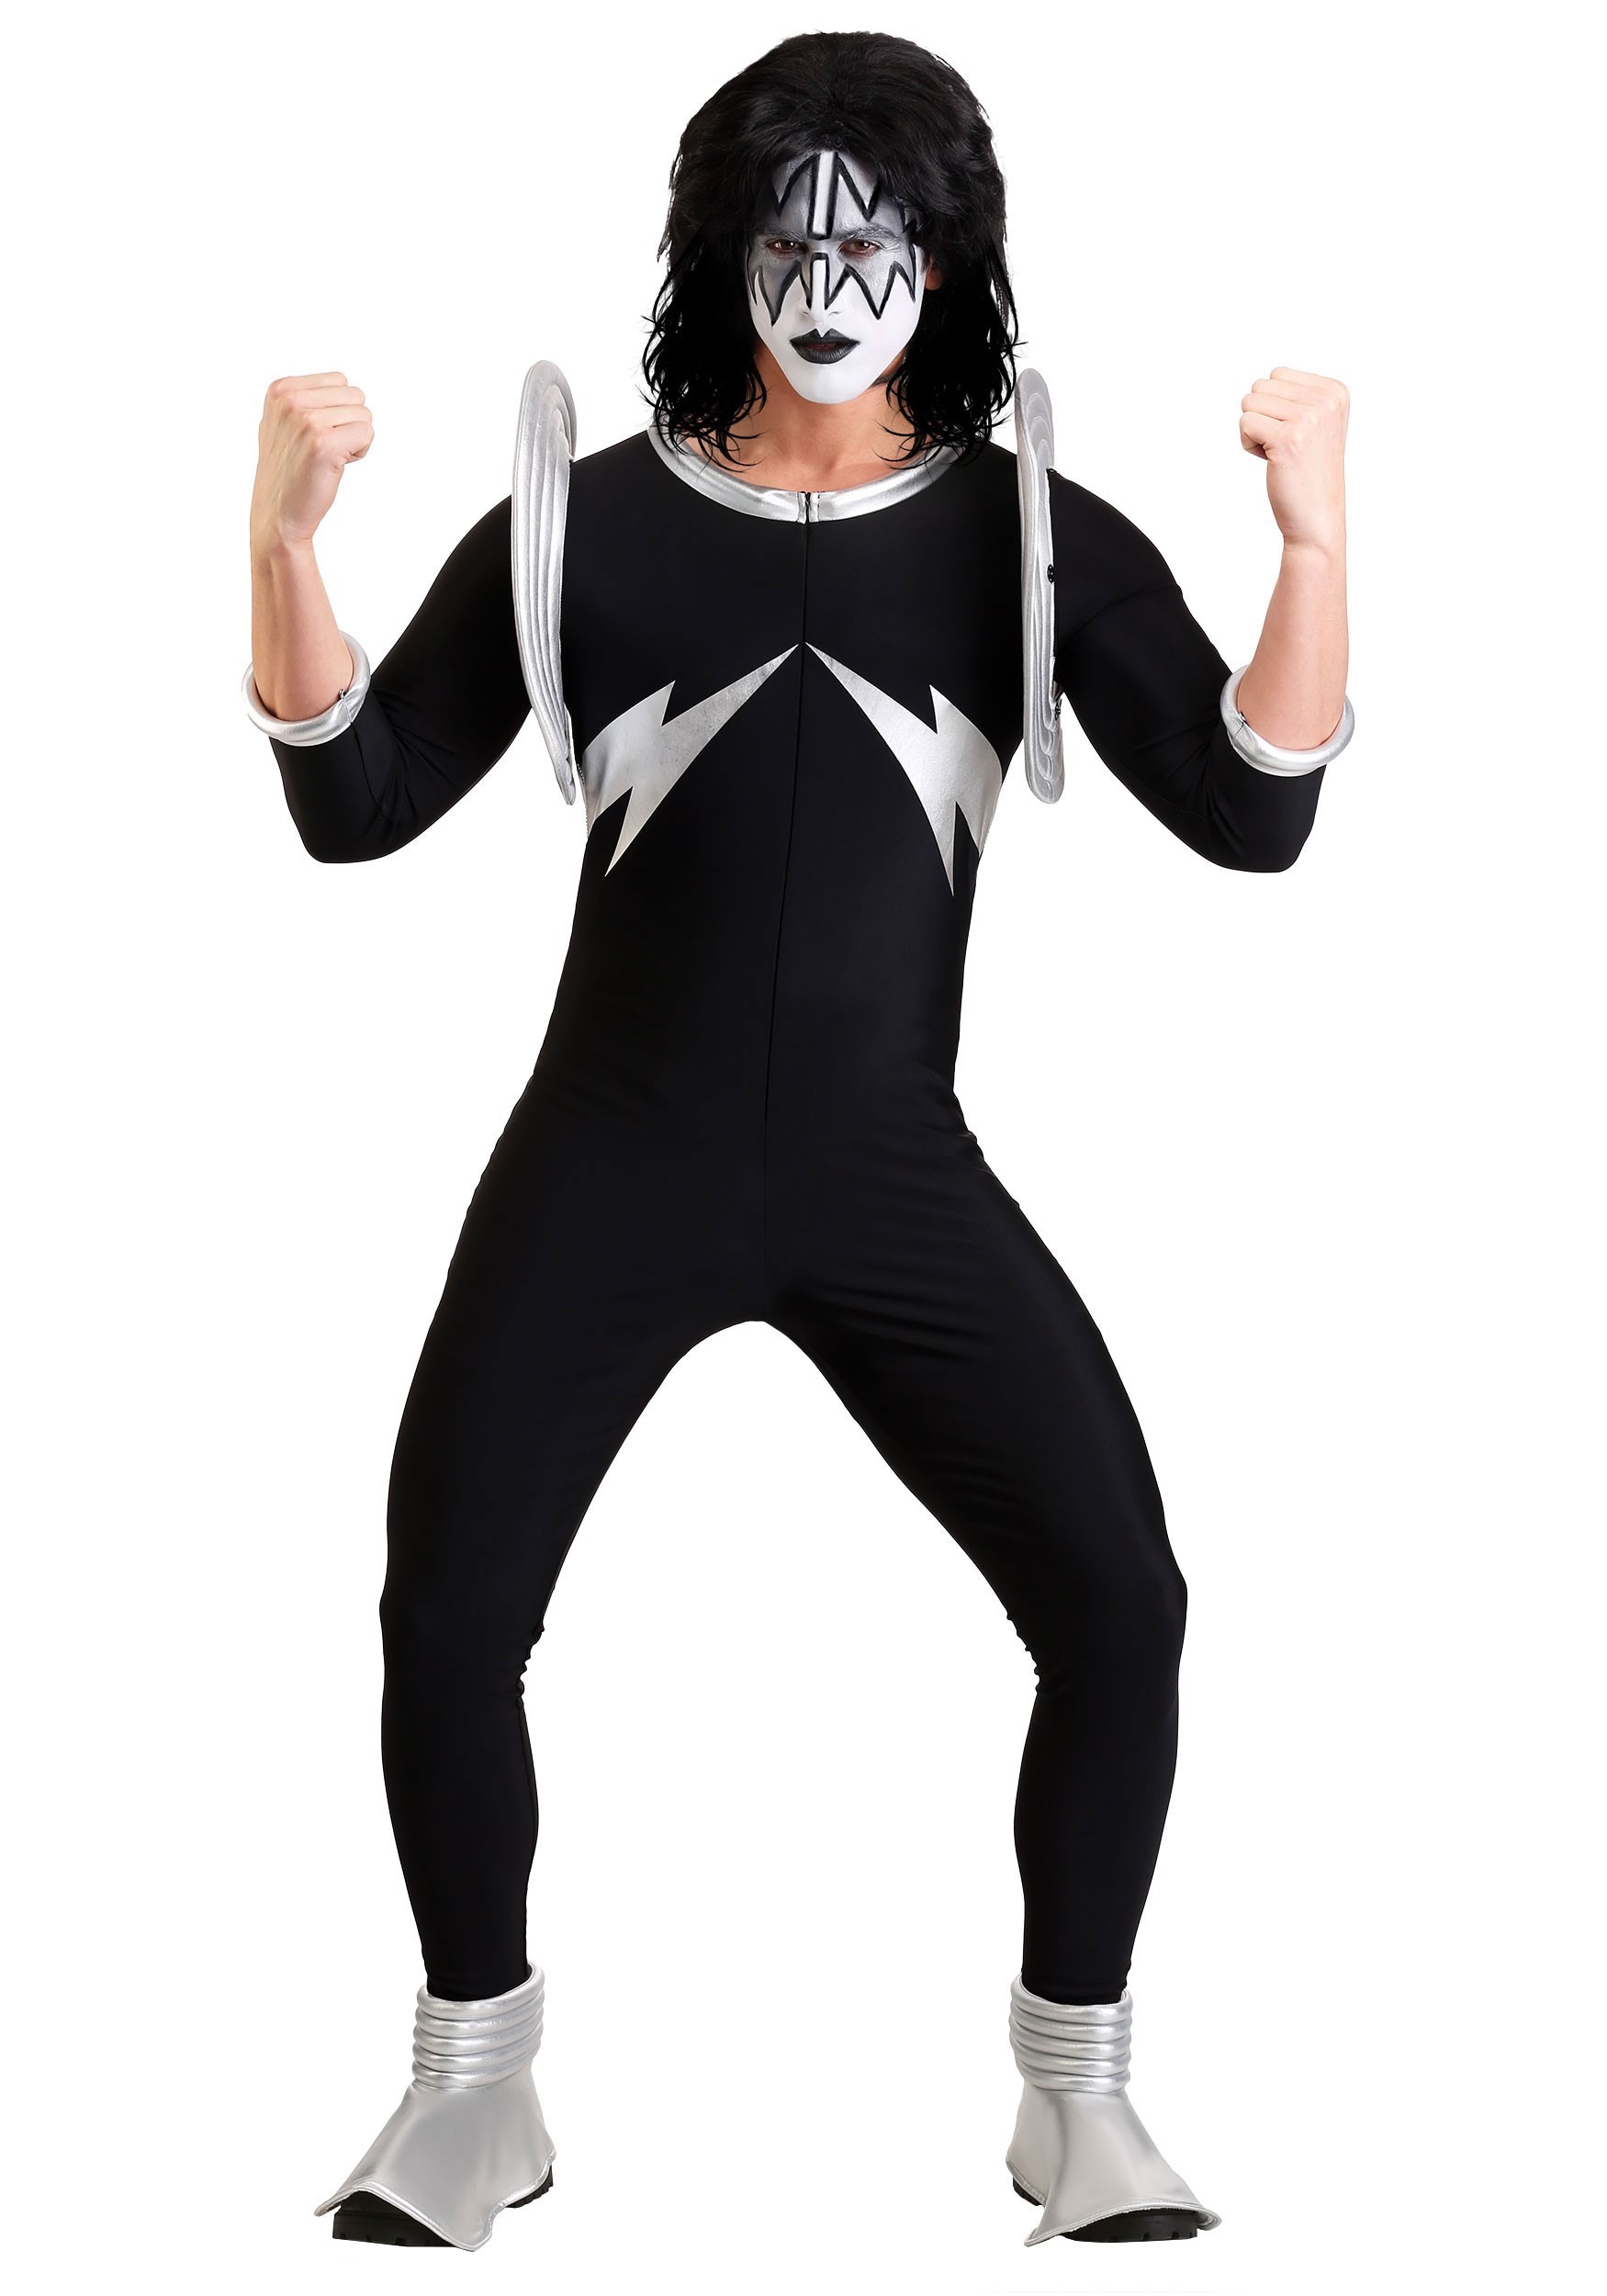 KISS Spaceman Adult Costume